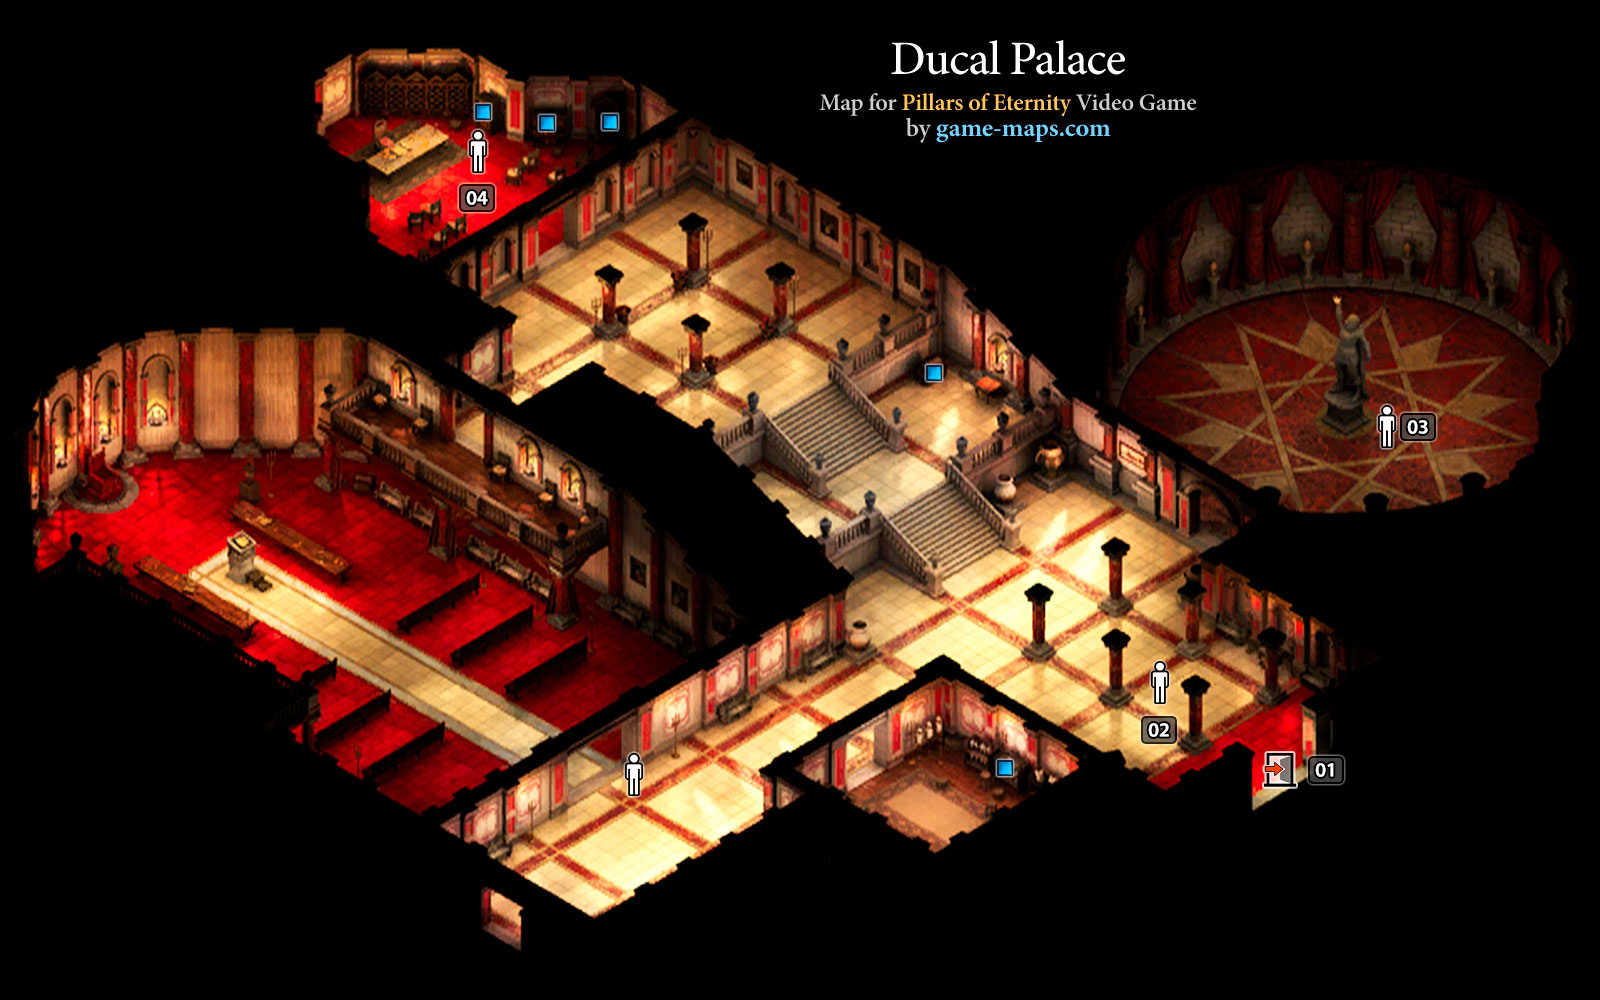 Ducal Palace Map - Defiance Bay - Pillars of Eternity